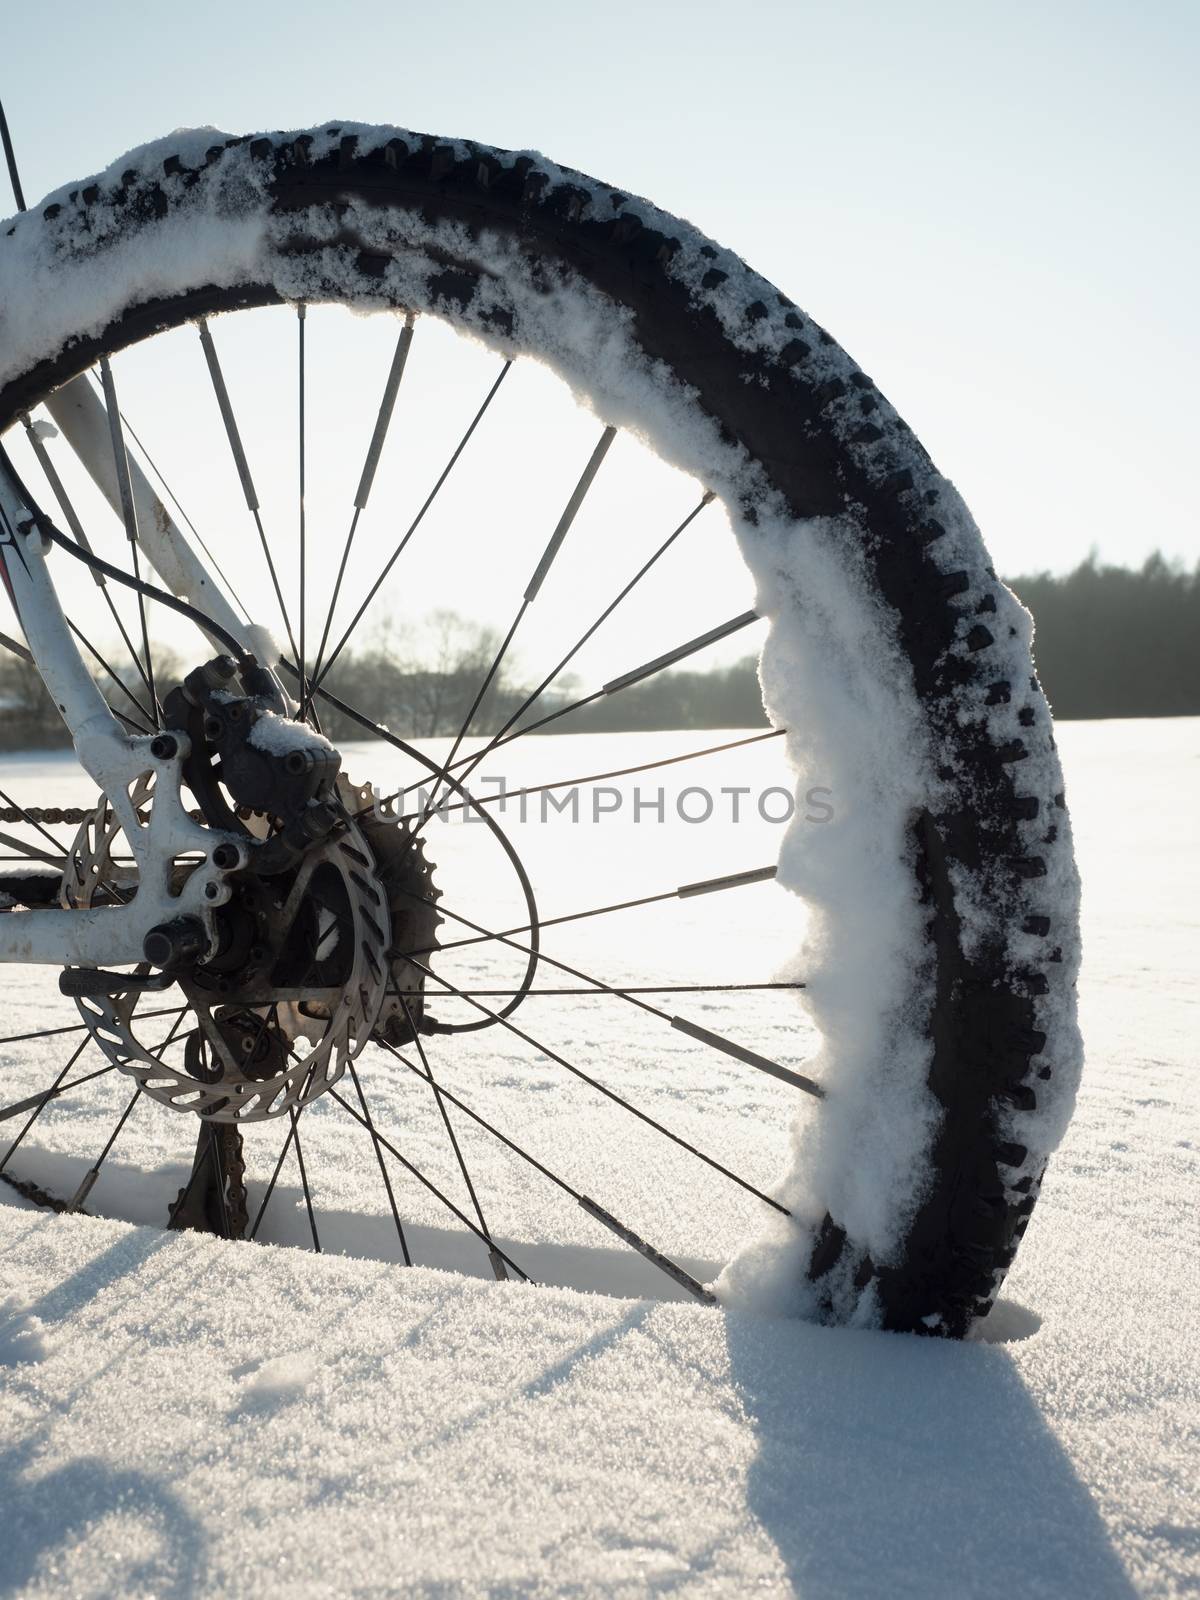 Mountain bike stay in powder snow.  Snow flakes melting on dark off road tyre. by rdonar2